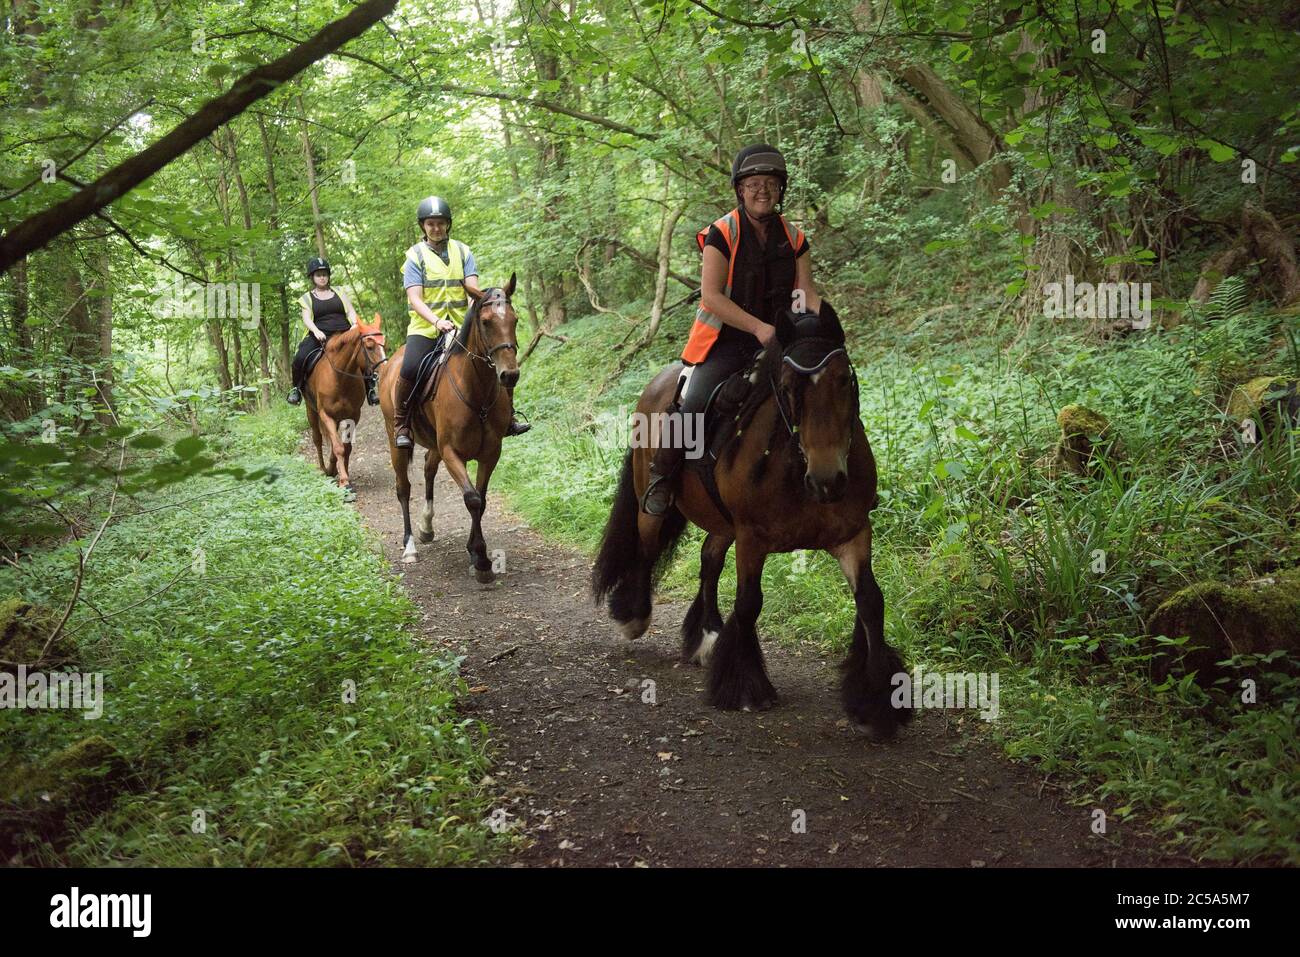 Horse riders riding the bridle path in Benthall Woods in Shropshire, England, Uk Stock Photo